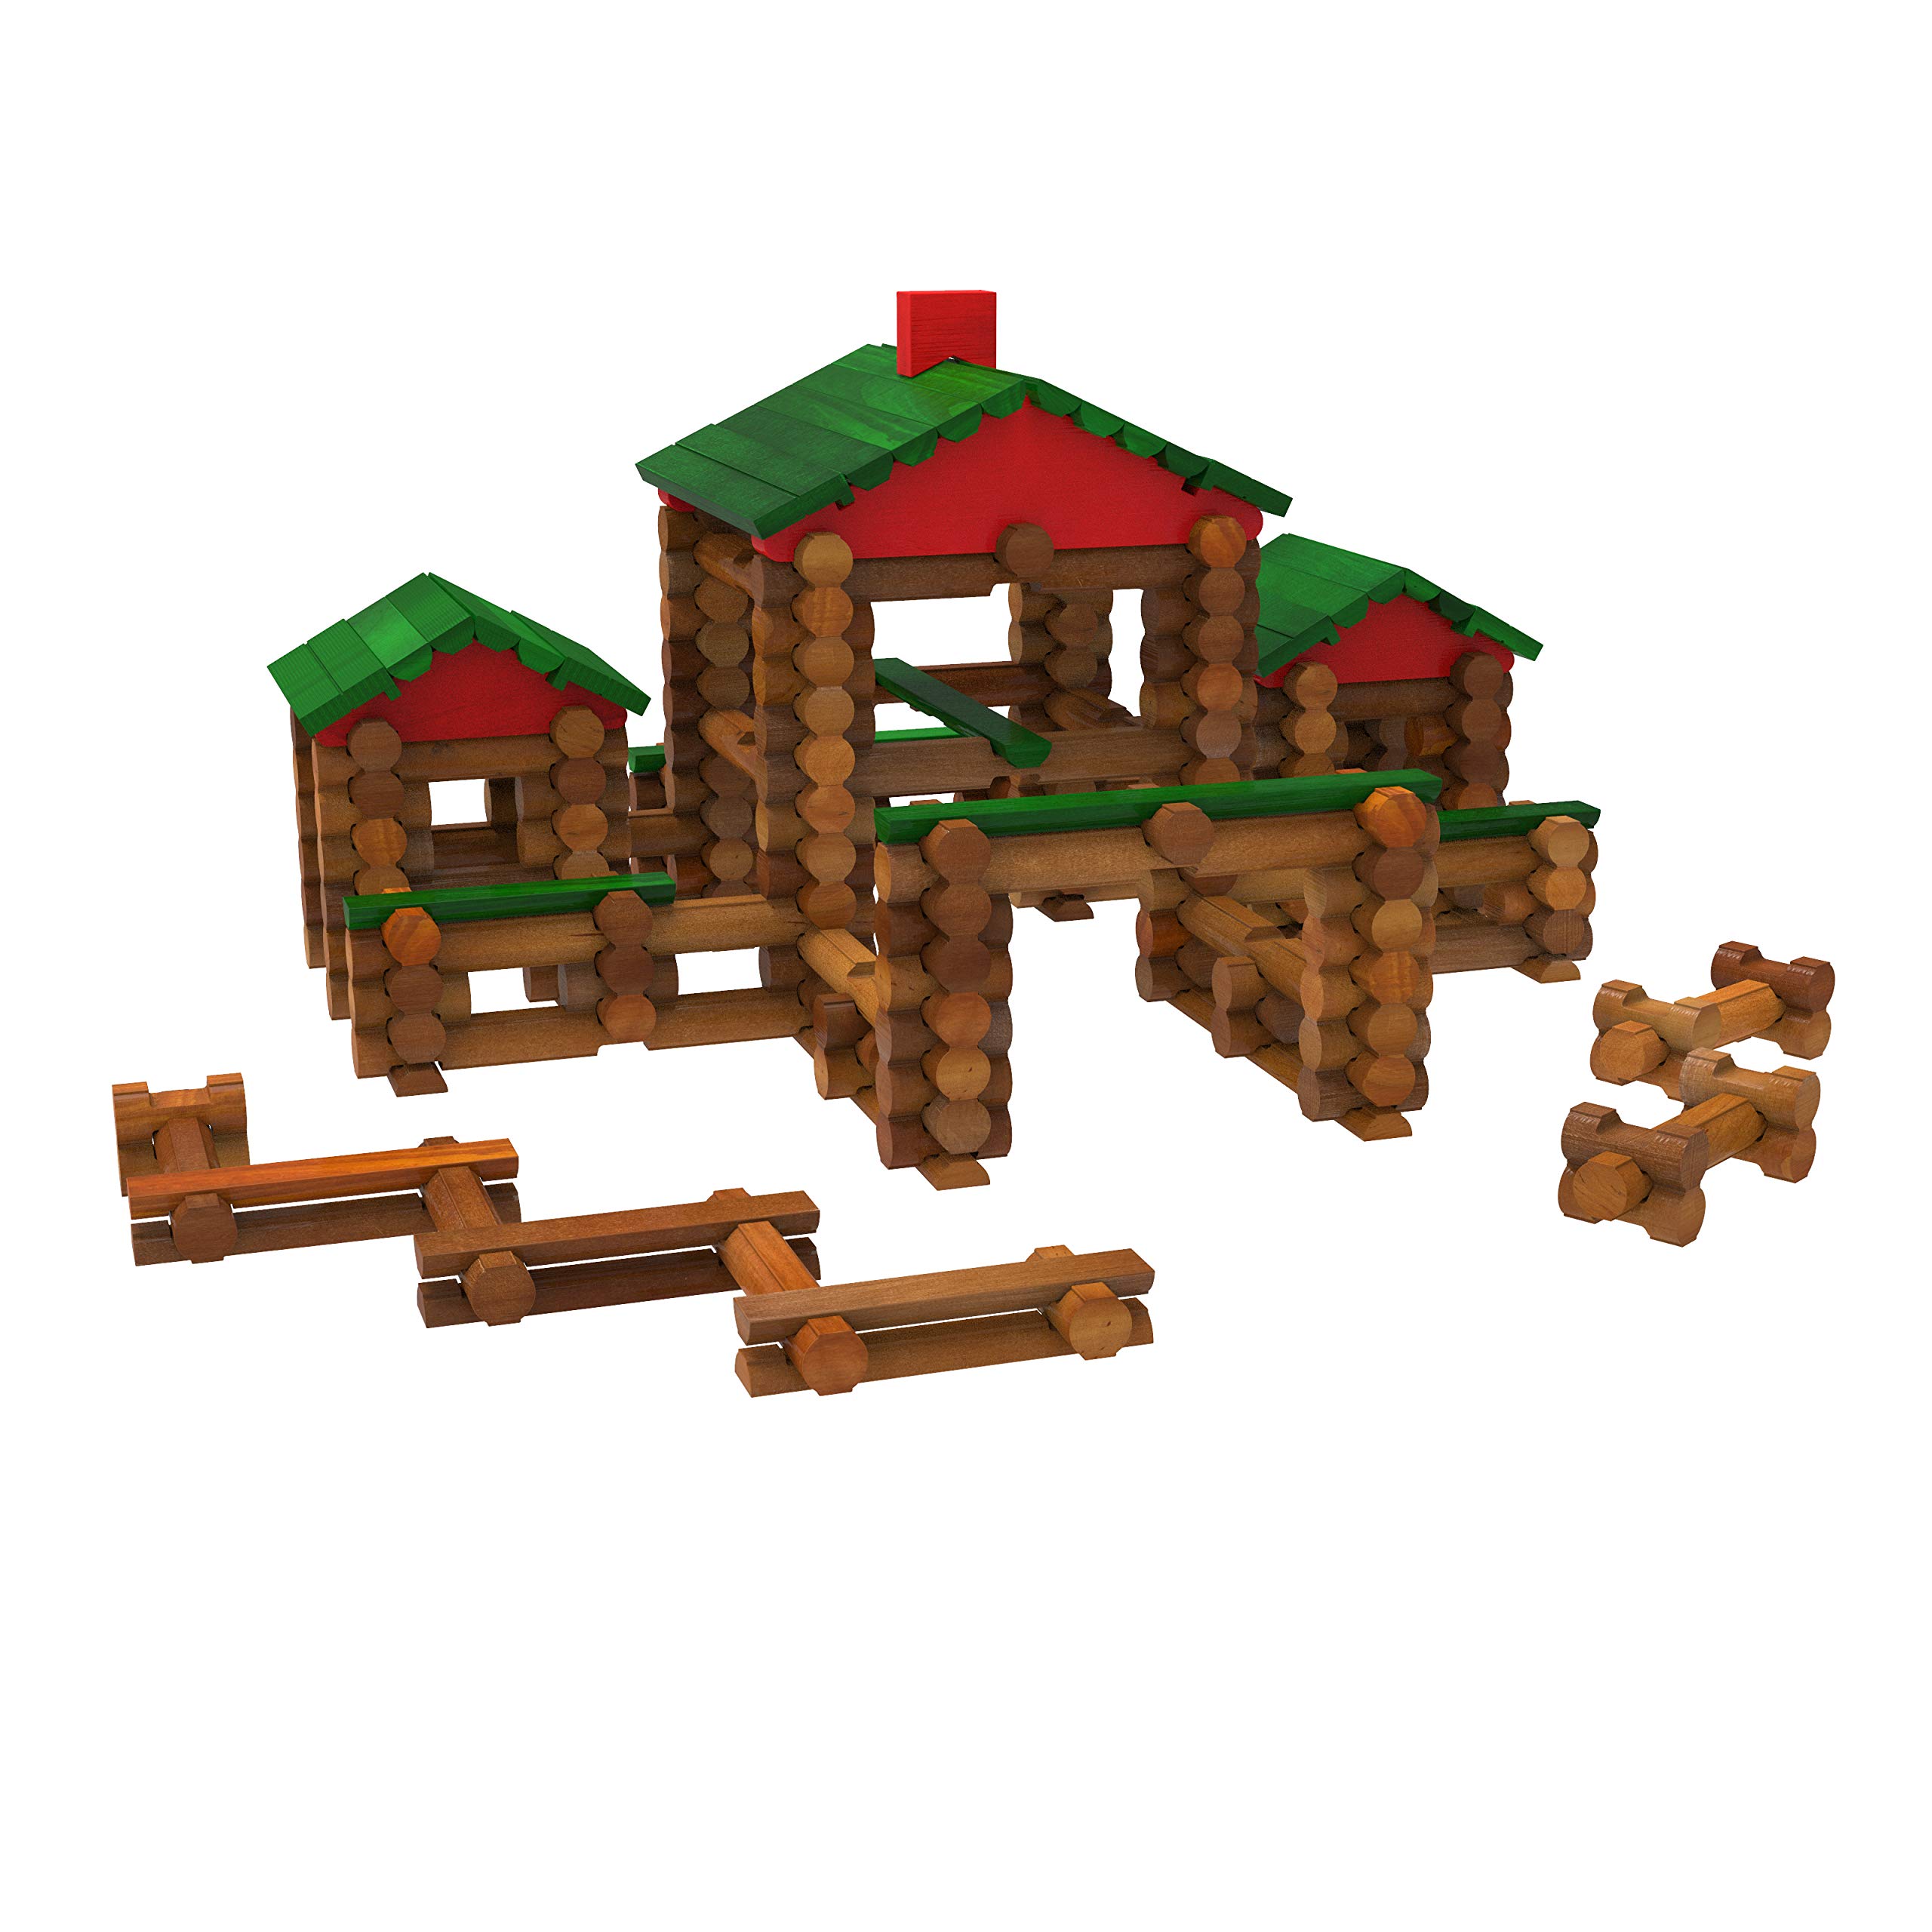 LINCOLN LOGS – Classic Farmhouse, 268 Pieces, Real Wood Logs - Ages 3+ - Best Retro Building Gift Set for Boys/Girls - Creative Construction Engineering - Preschool Education Toy